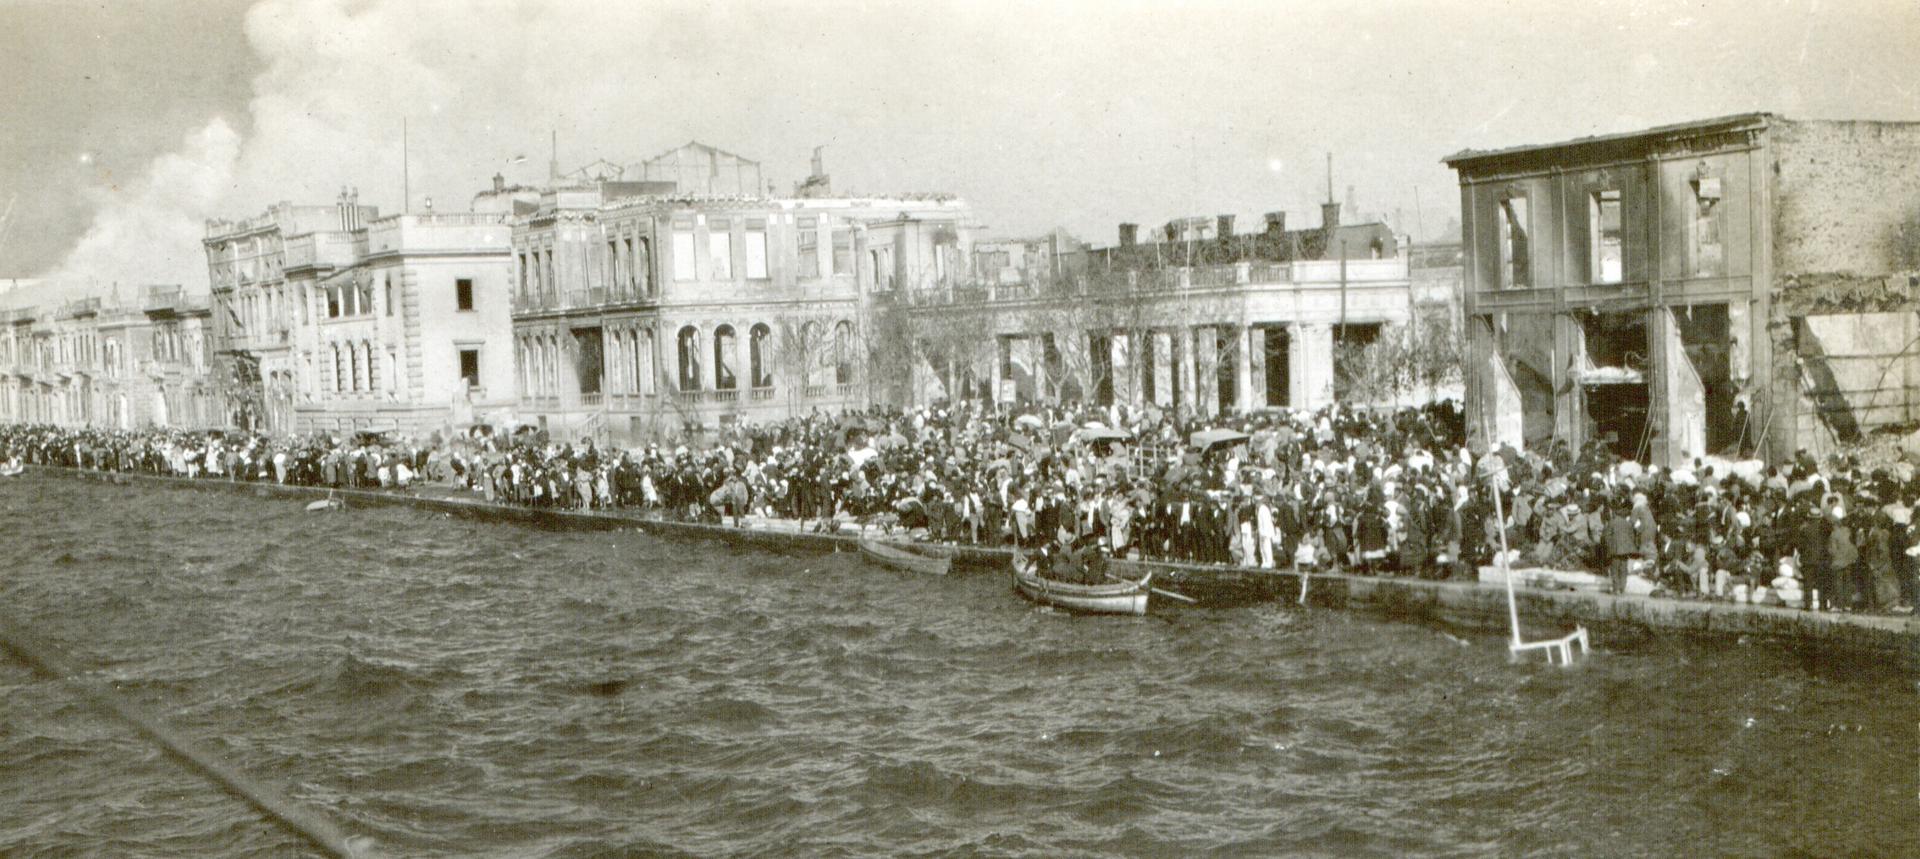 An American minister organized a last-minute sea rescue of 250,000 people from the Ottoman city of Smyrna at the height of the Armenian genocide